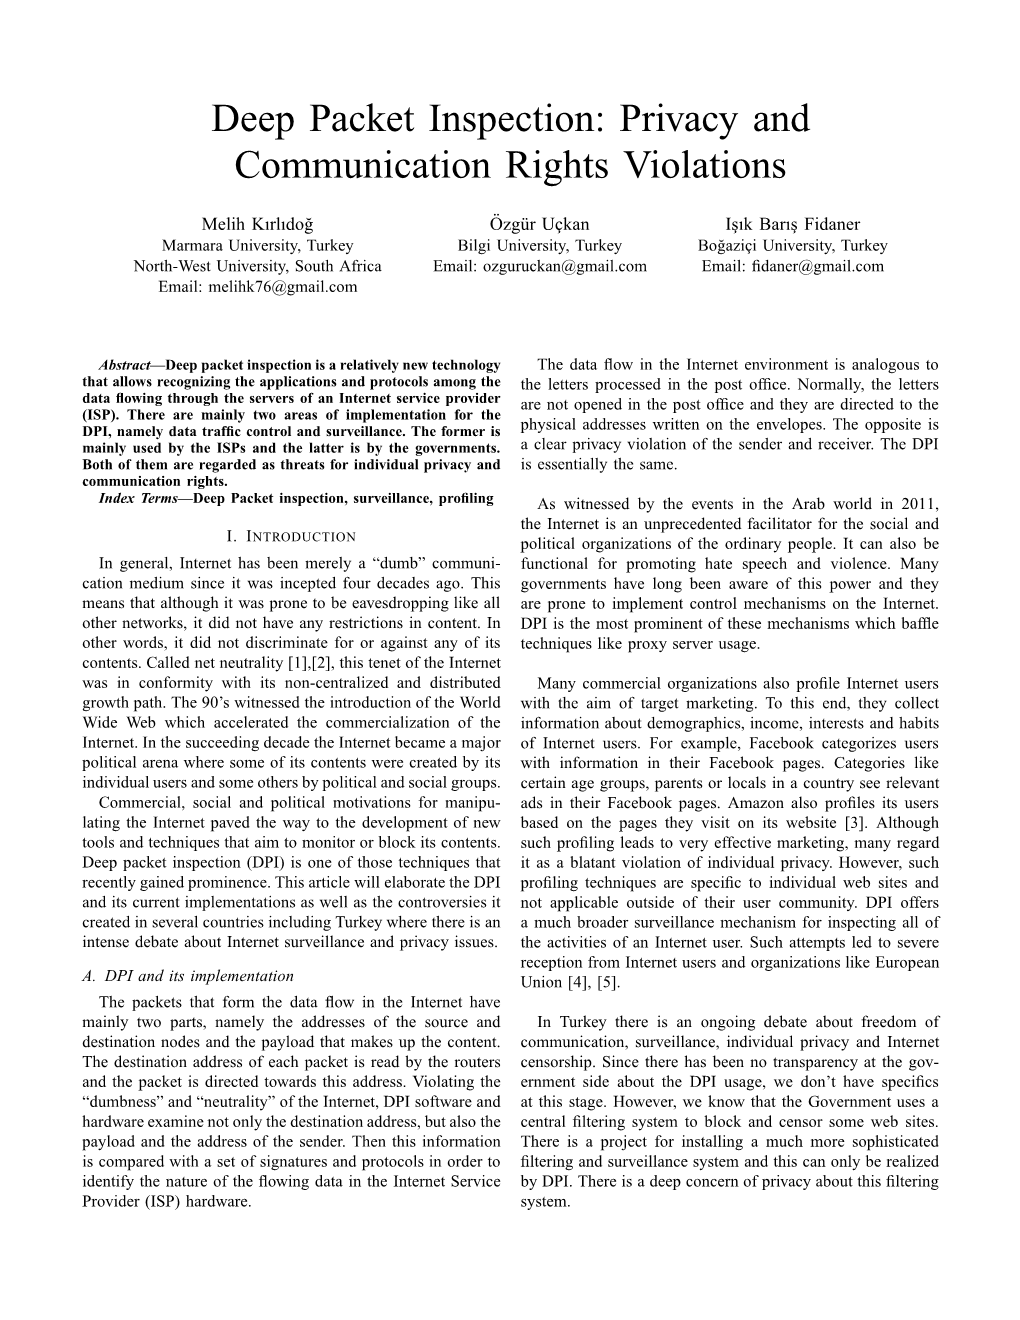 Deep Packet Inspection: Privacy and Communication Rights Violations